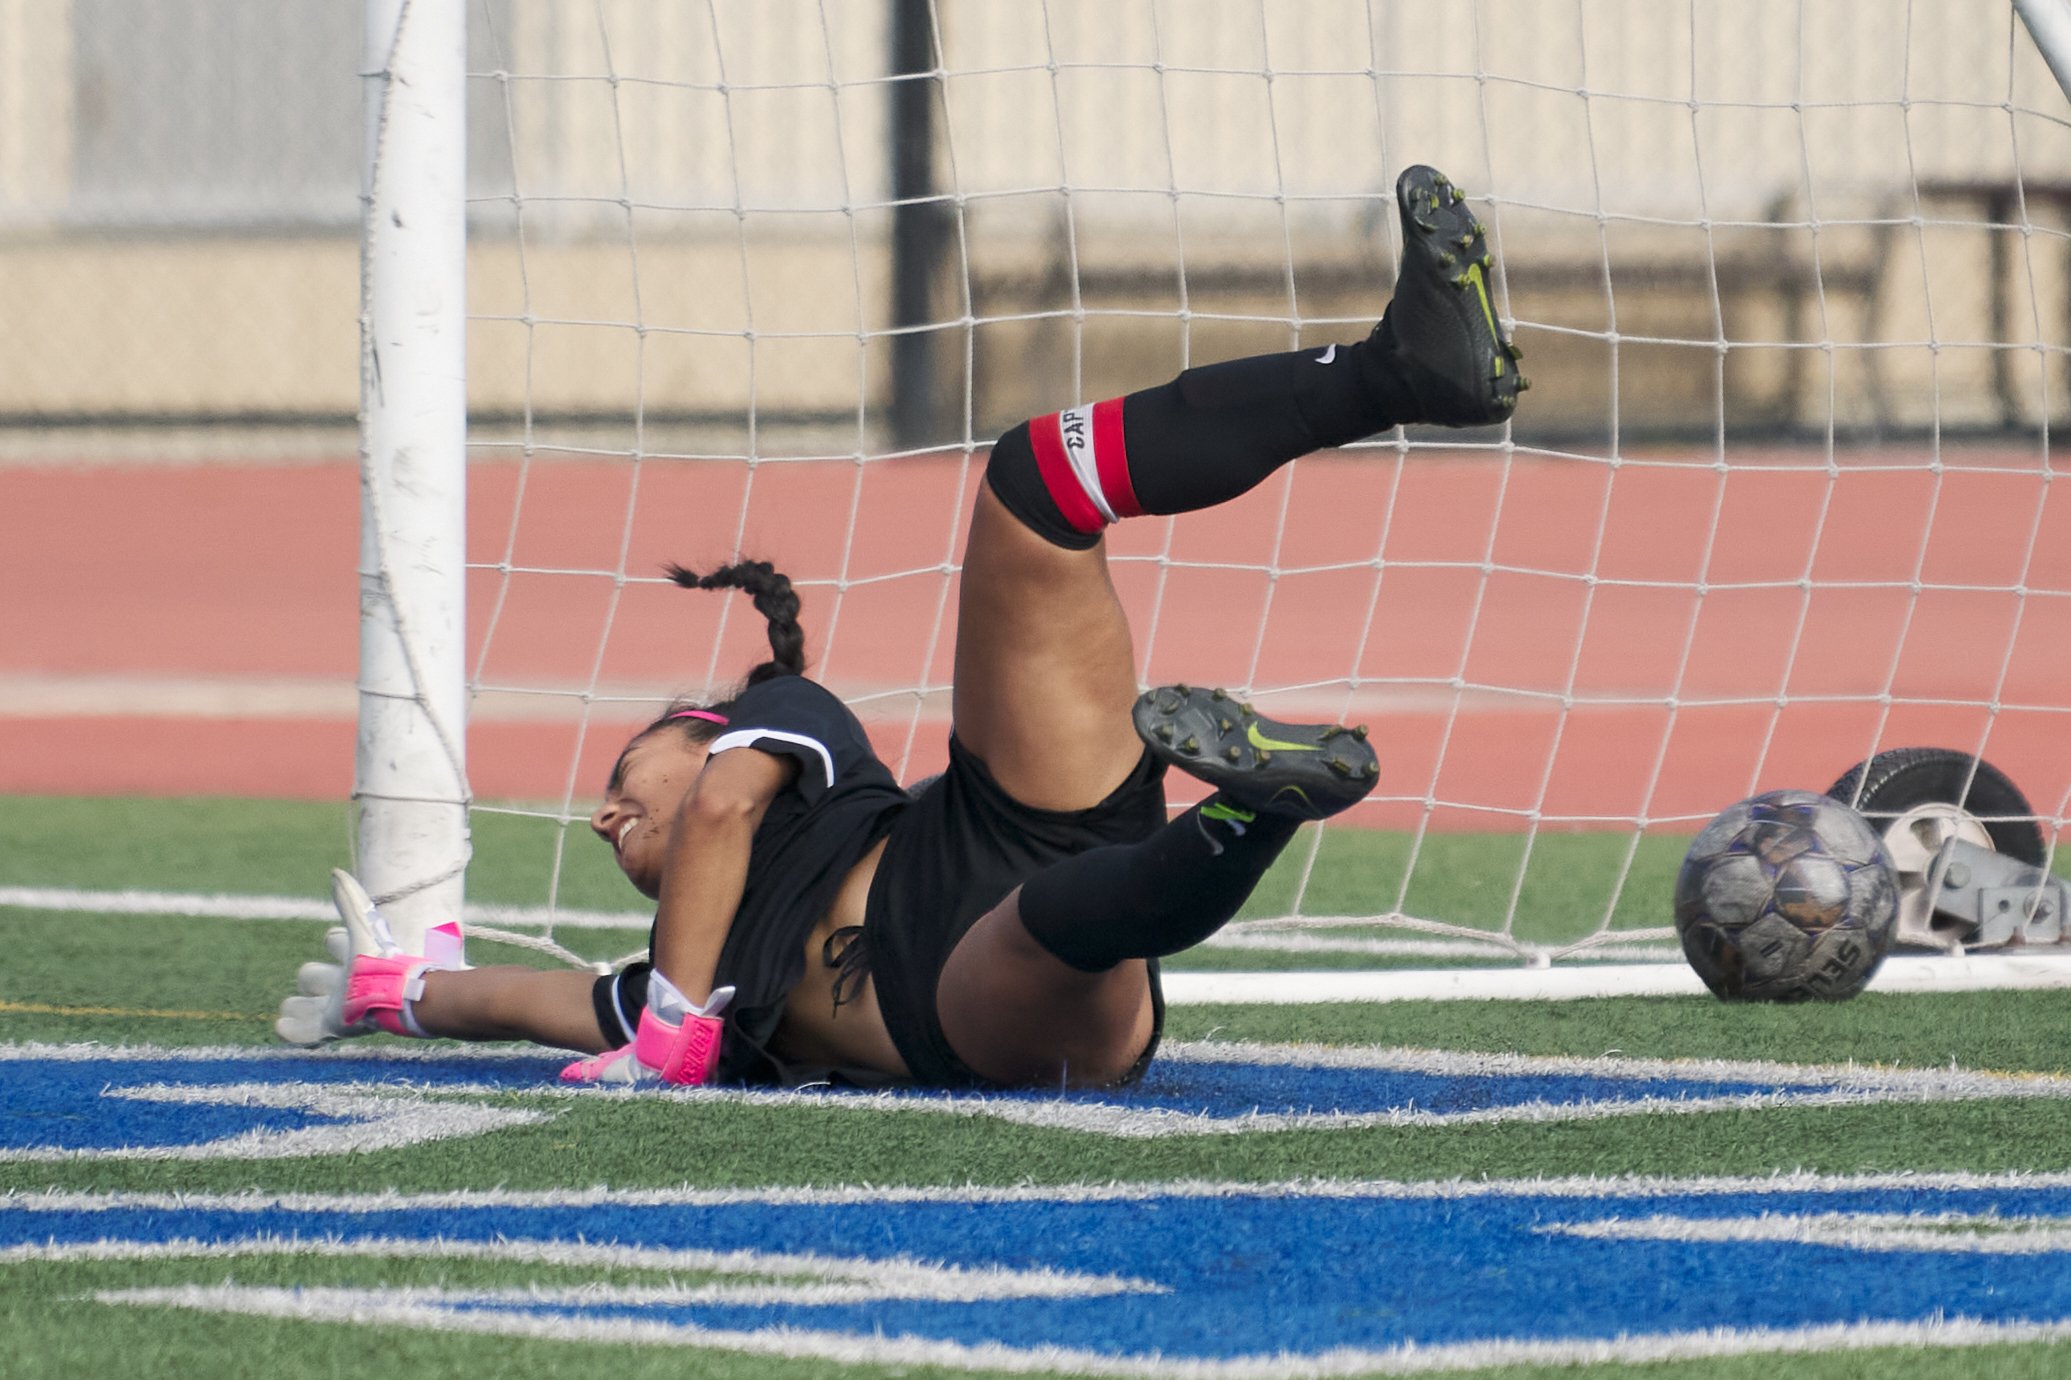  Glendale Community College Vaqueros' Goalie Stephanie Portillo fails to block a shot by Santa Monica College Corsairs' Ali Alban during the women's soccer match on Friday, Oct. 21, 2022, at Corsair Field in Santa Monica, Calif. The Corsairs won 8-0.